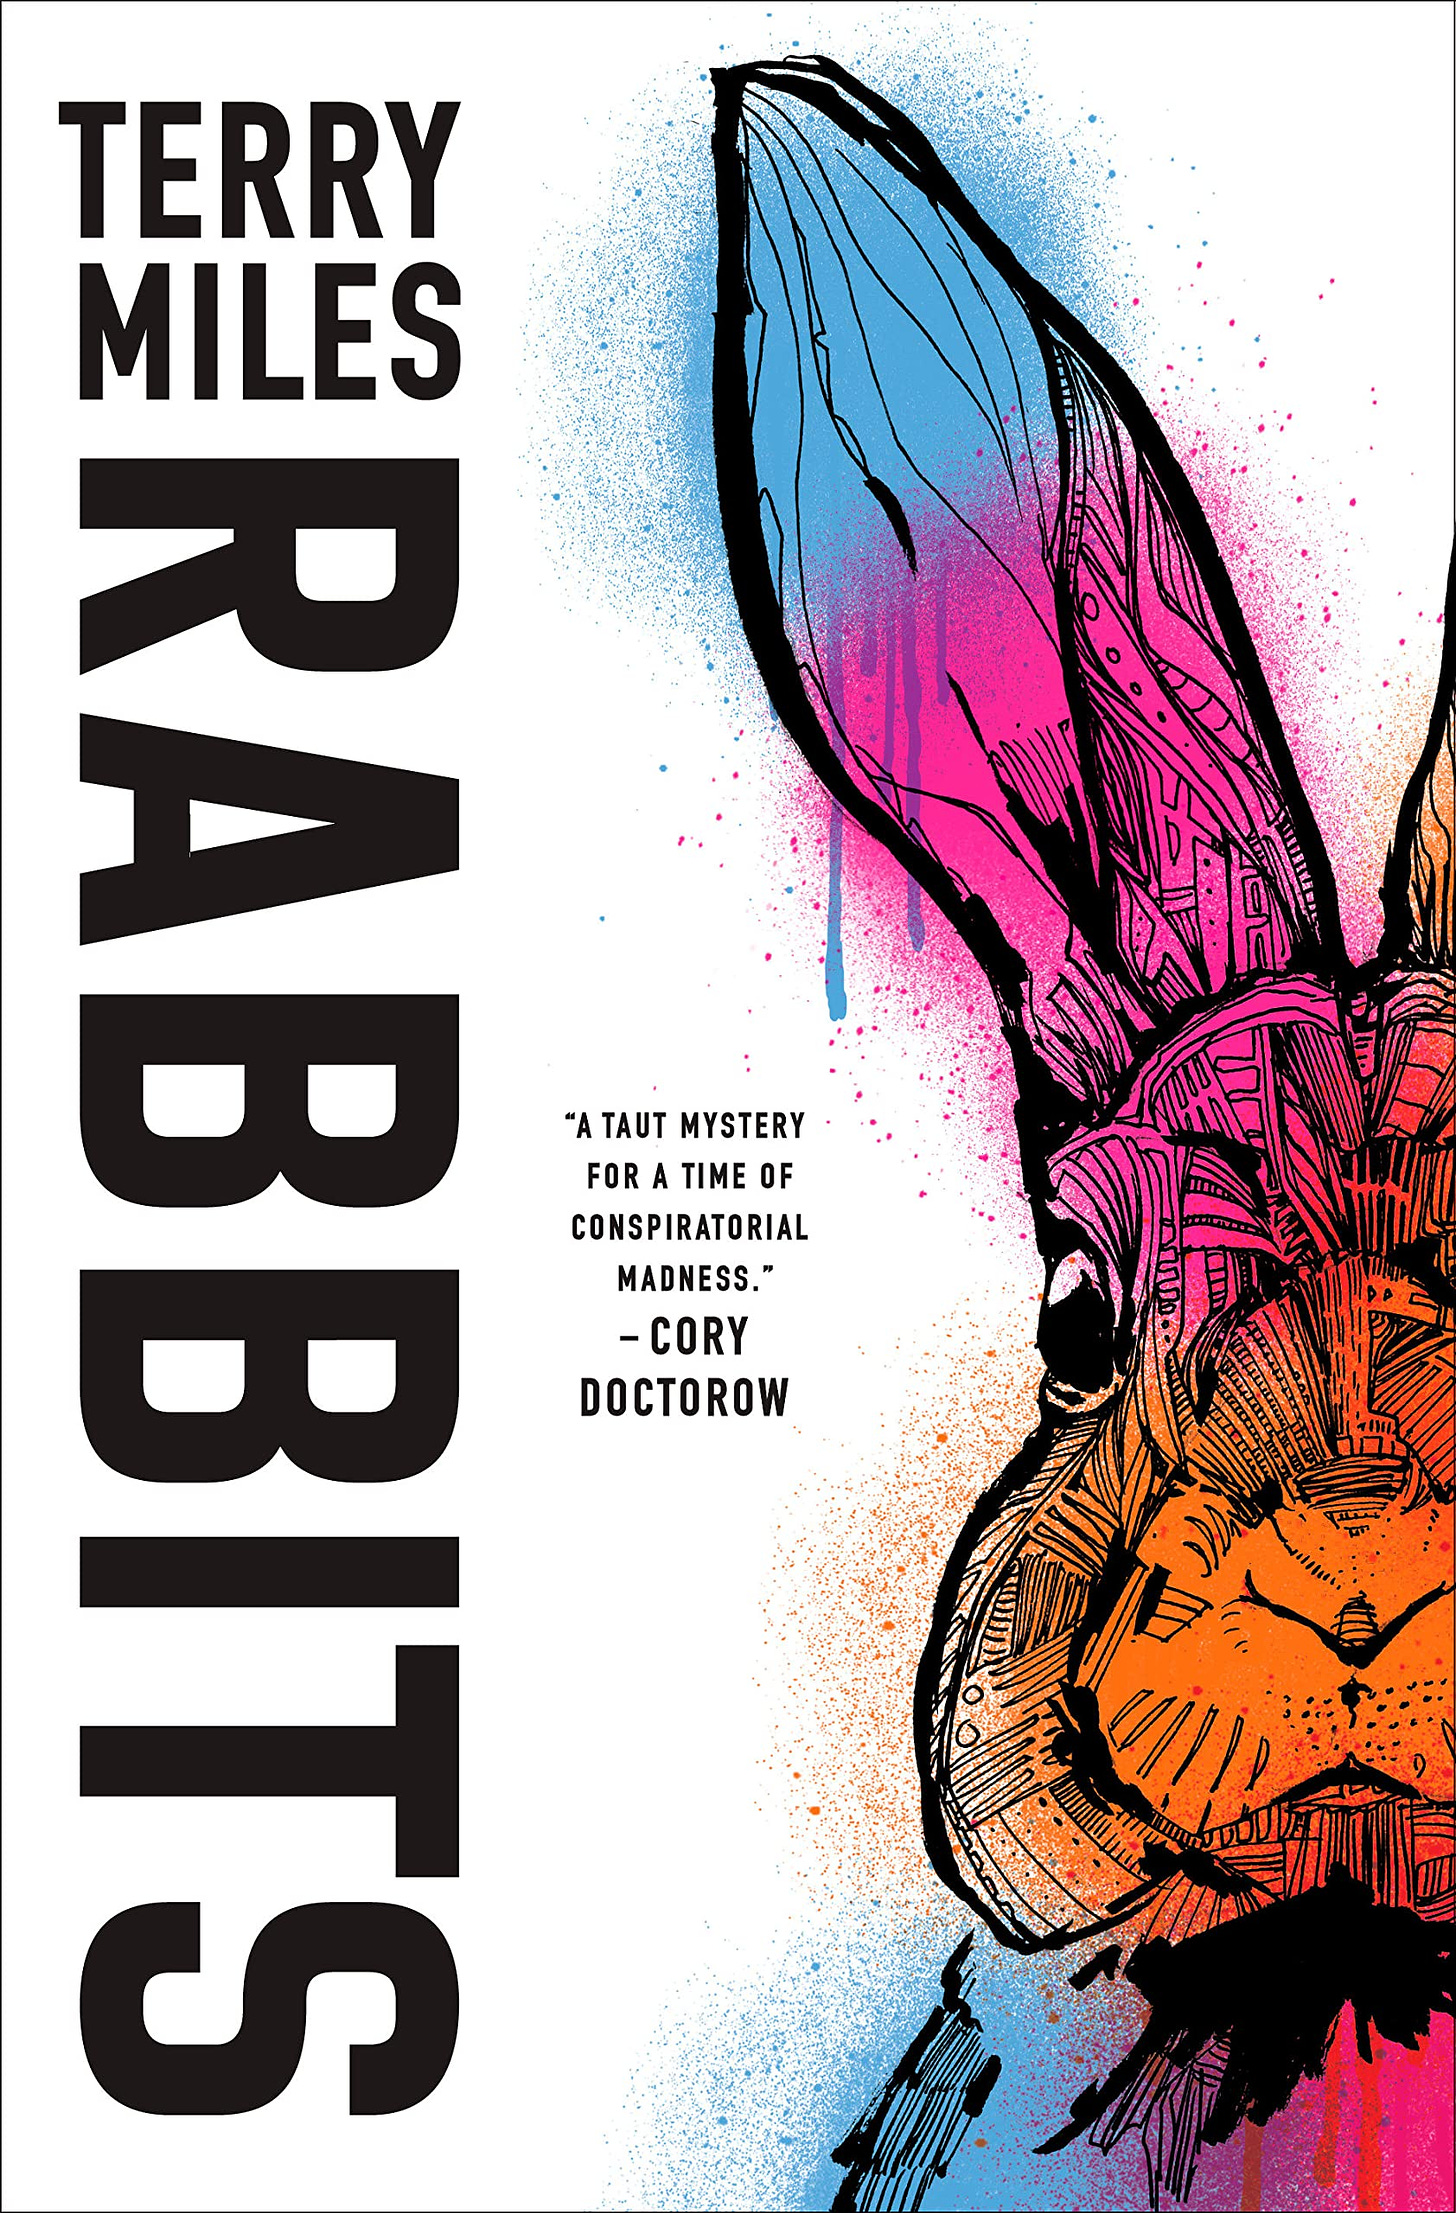 The cover for “Rabbits” by Terry Miles